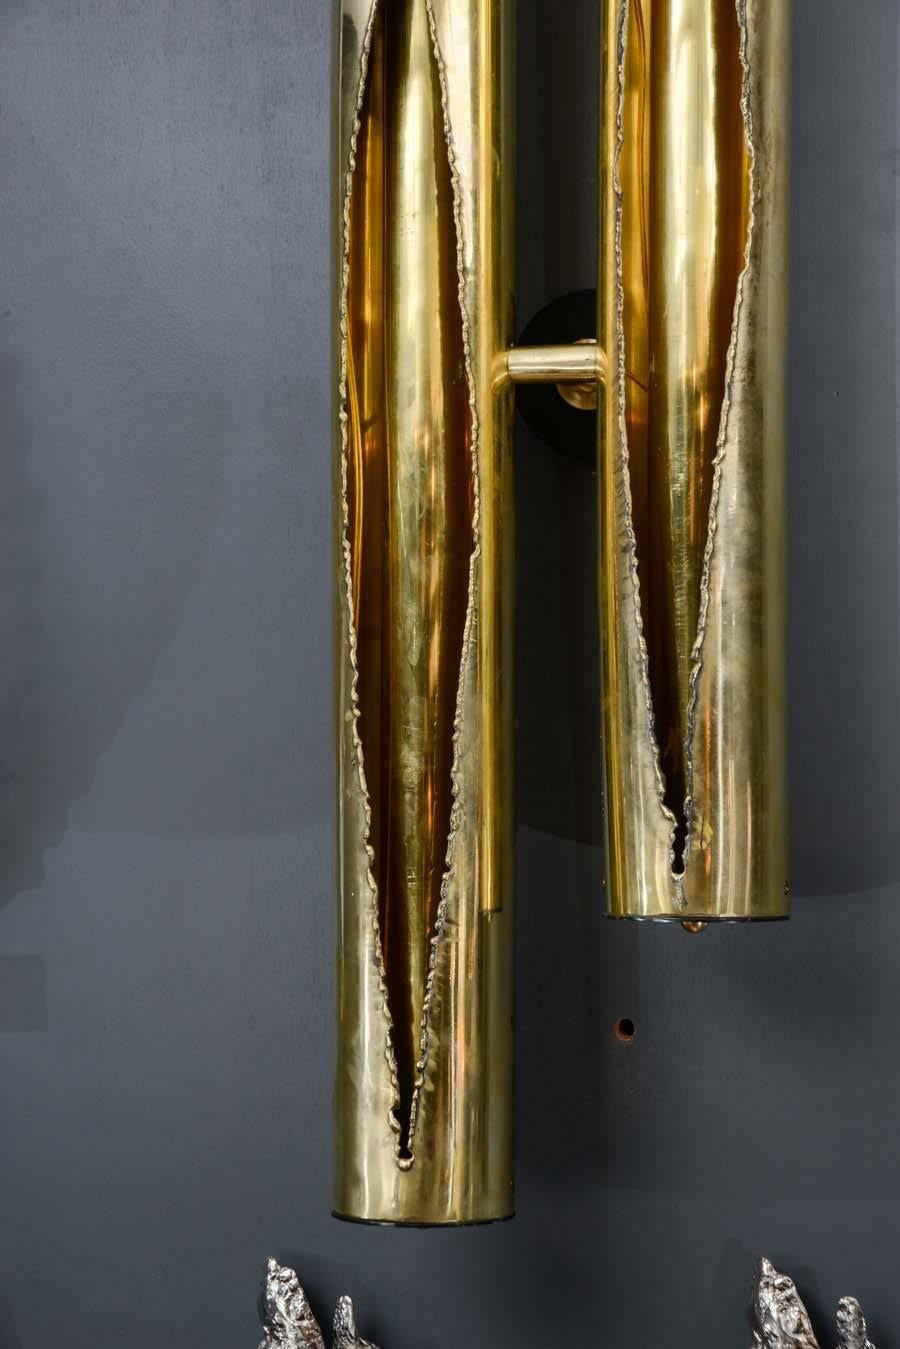 Exceptional set of wall sconces made of brass with black metal settings.

The sconces are made of two tubes looking like they were cut open to reveal the inside which is an other tube hiding the light sources.